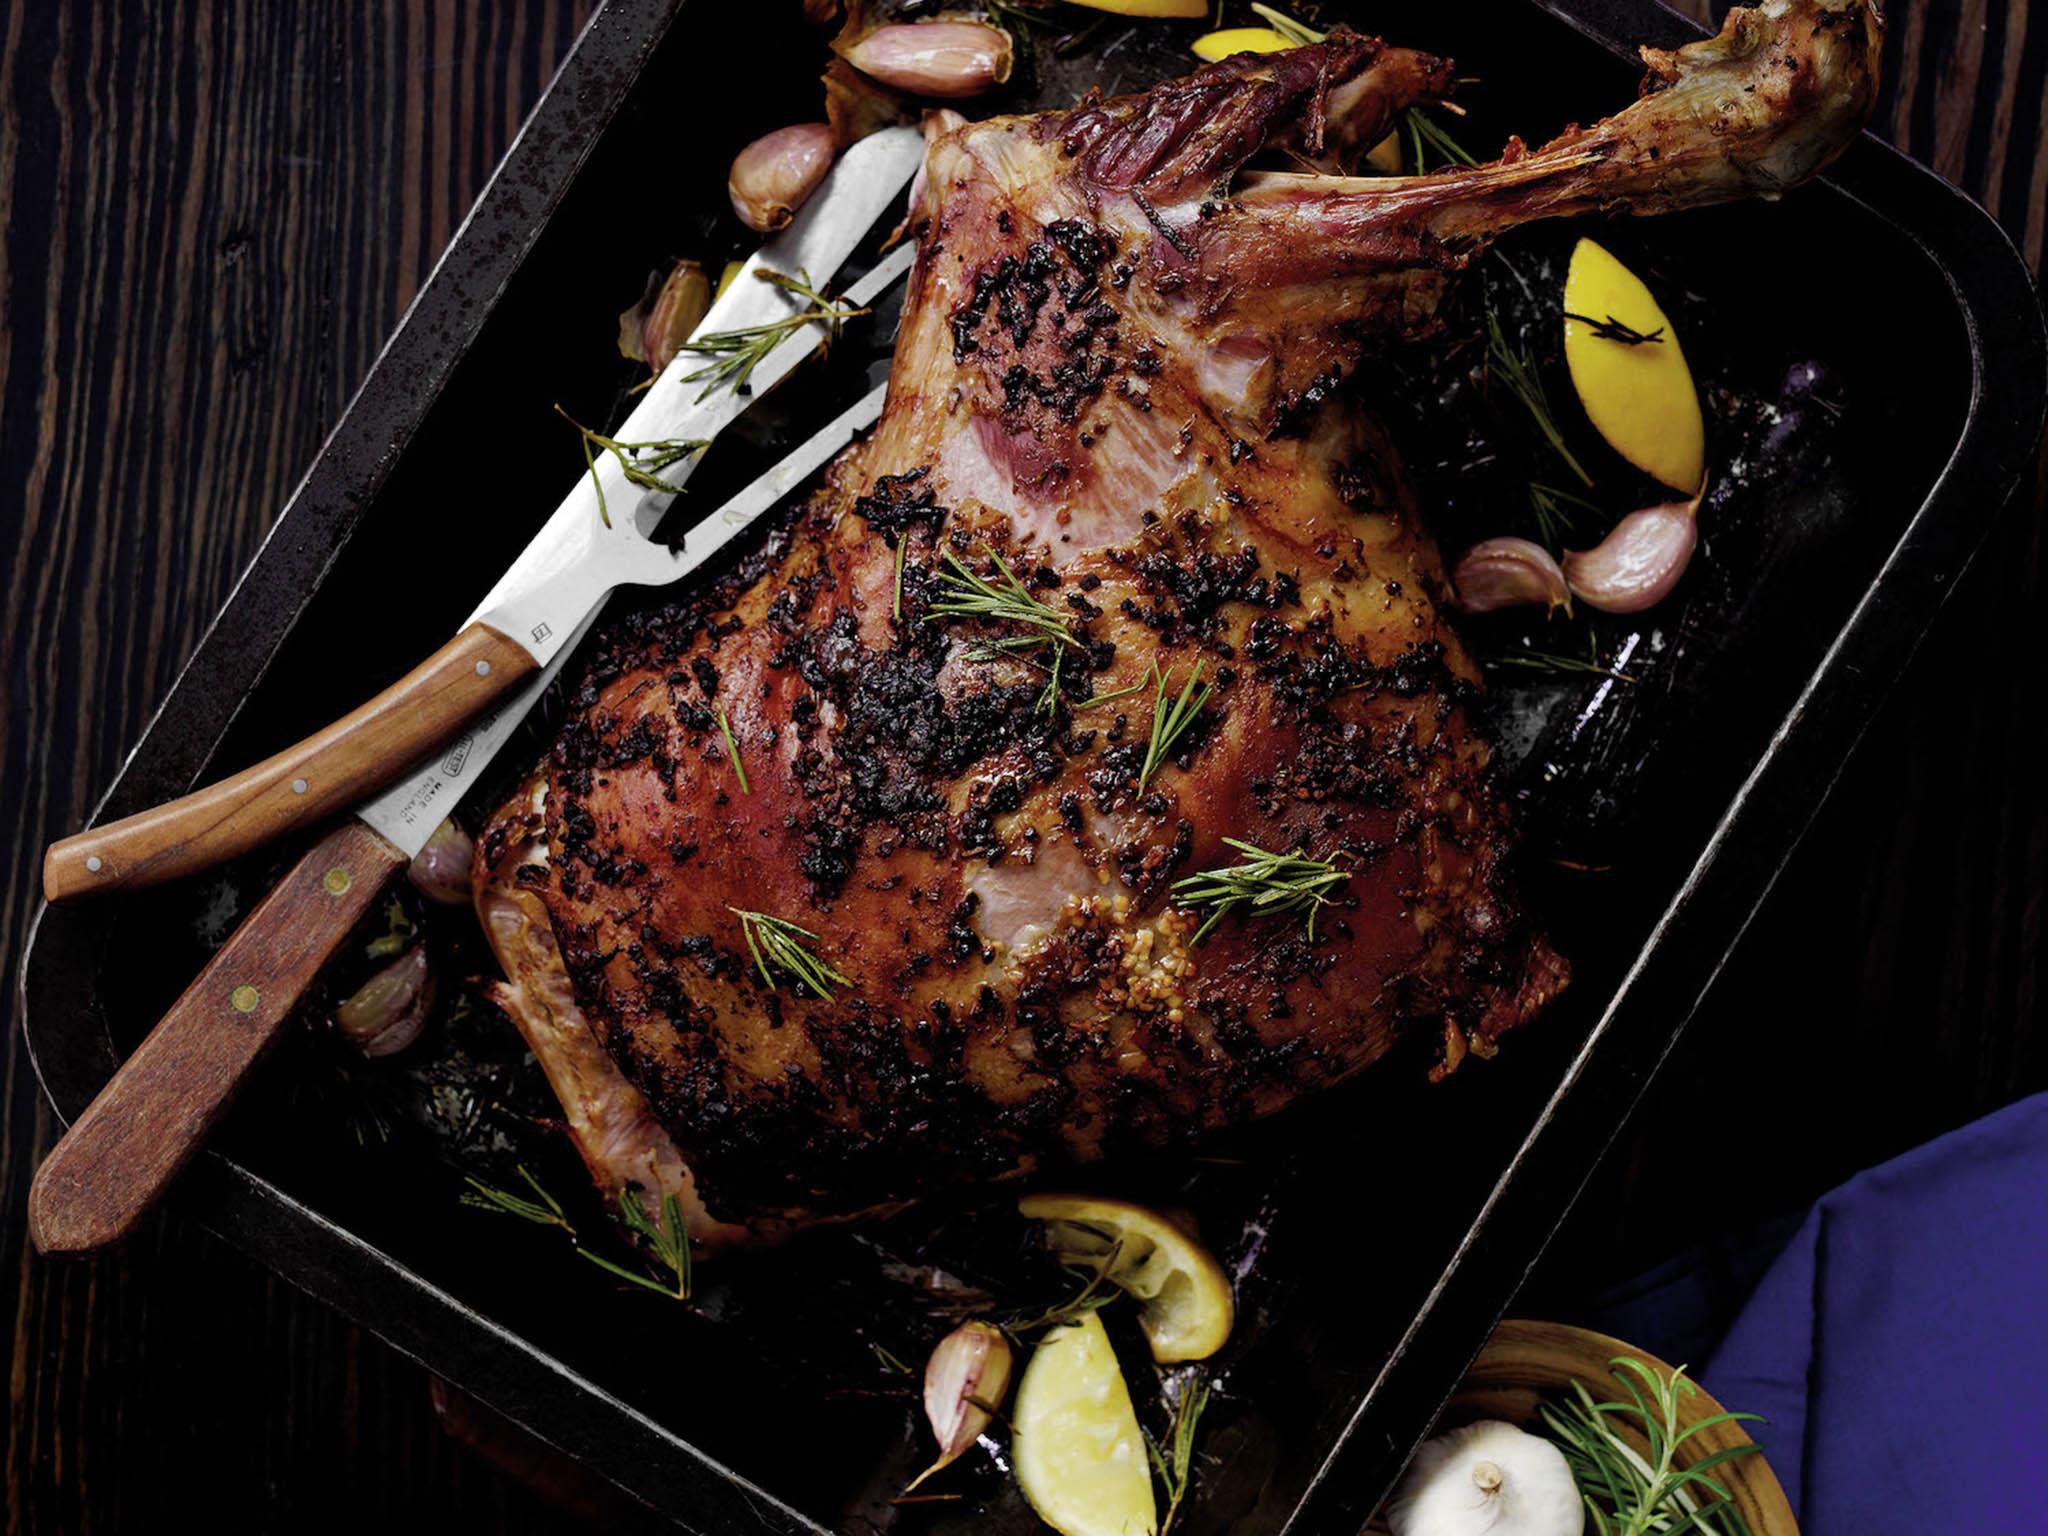 Provenance’s lamb shoulder is rich and flavoursome